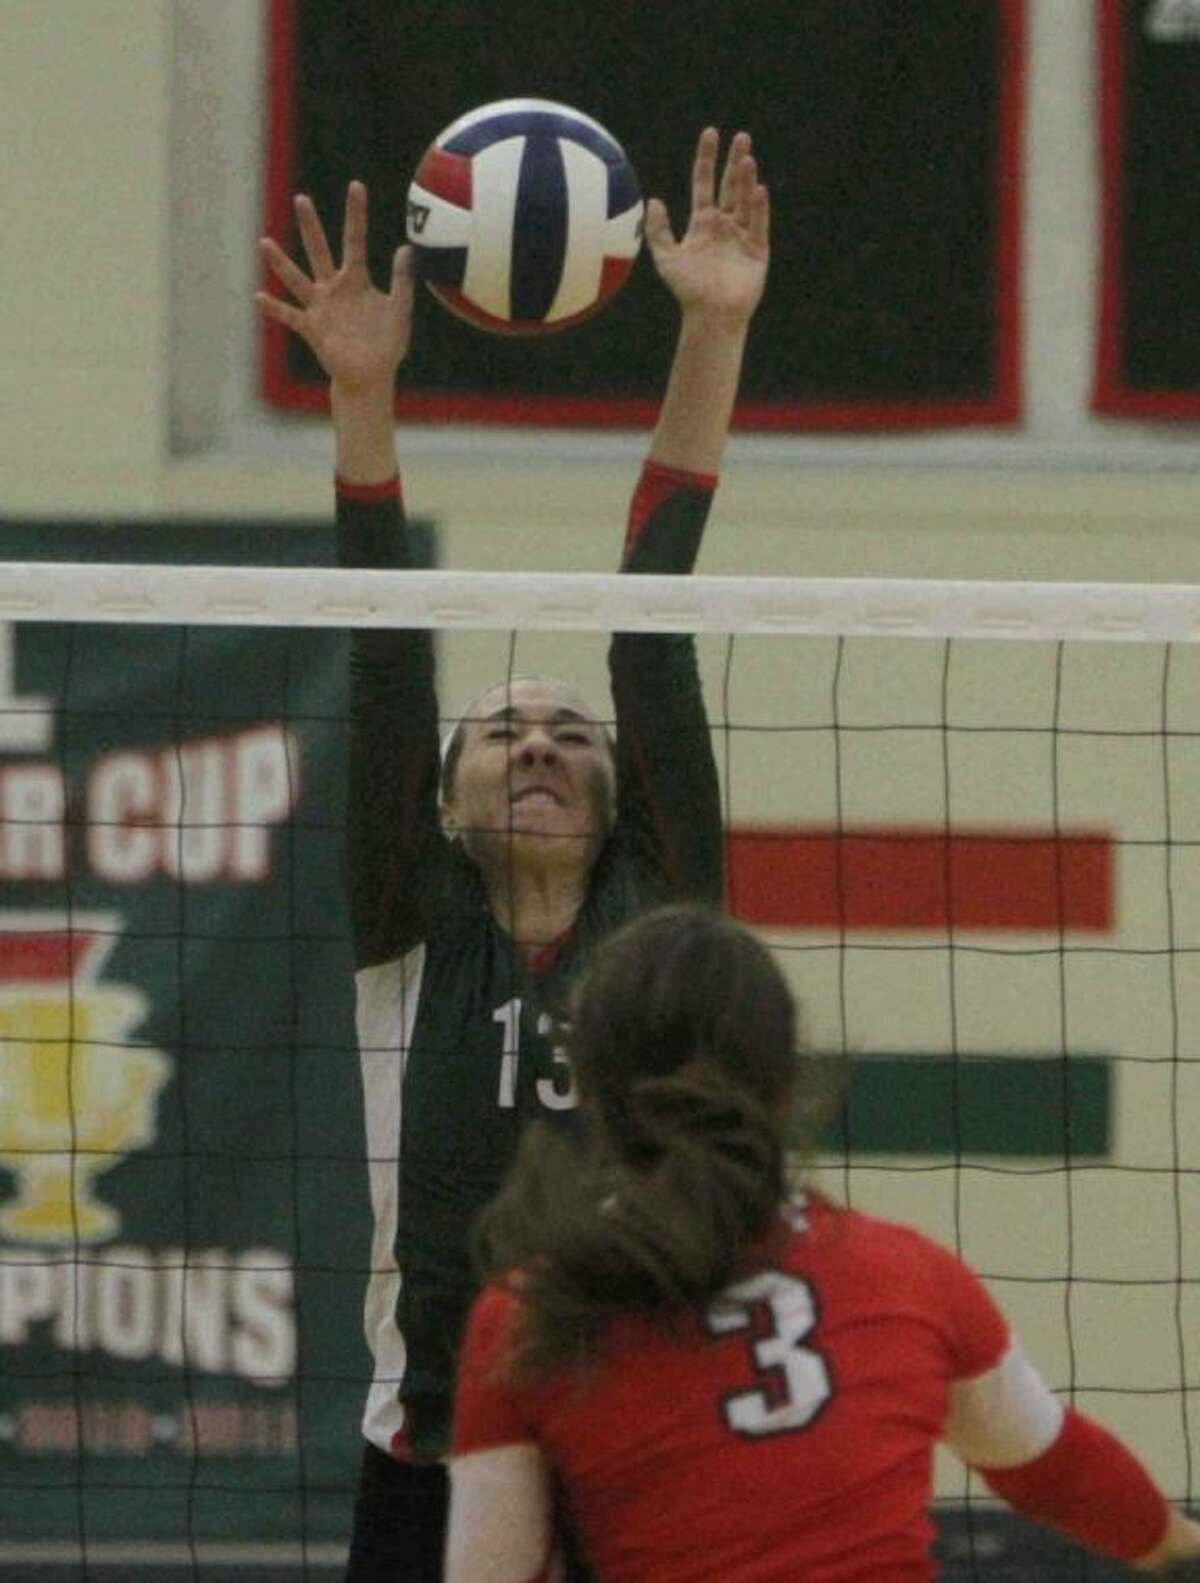 The Woodlands’ Julia Pasch blocks a shot by Katy’s Bailey McFarland on Tuesday at The Woodlands High School. To view or purchase this photo and others like it, visit HCNpics.com.